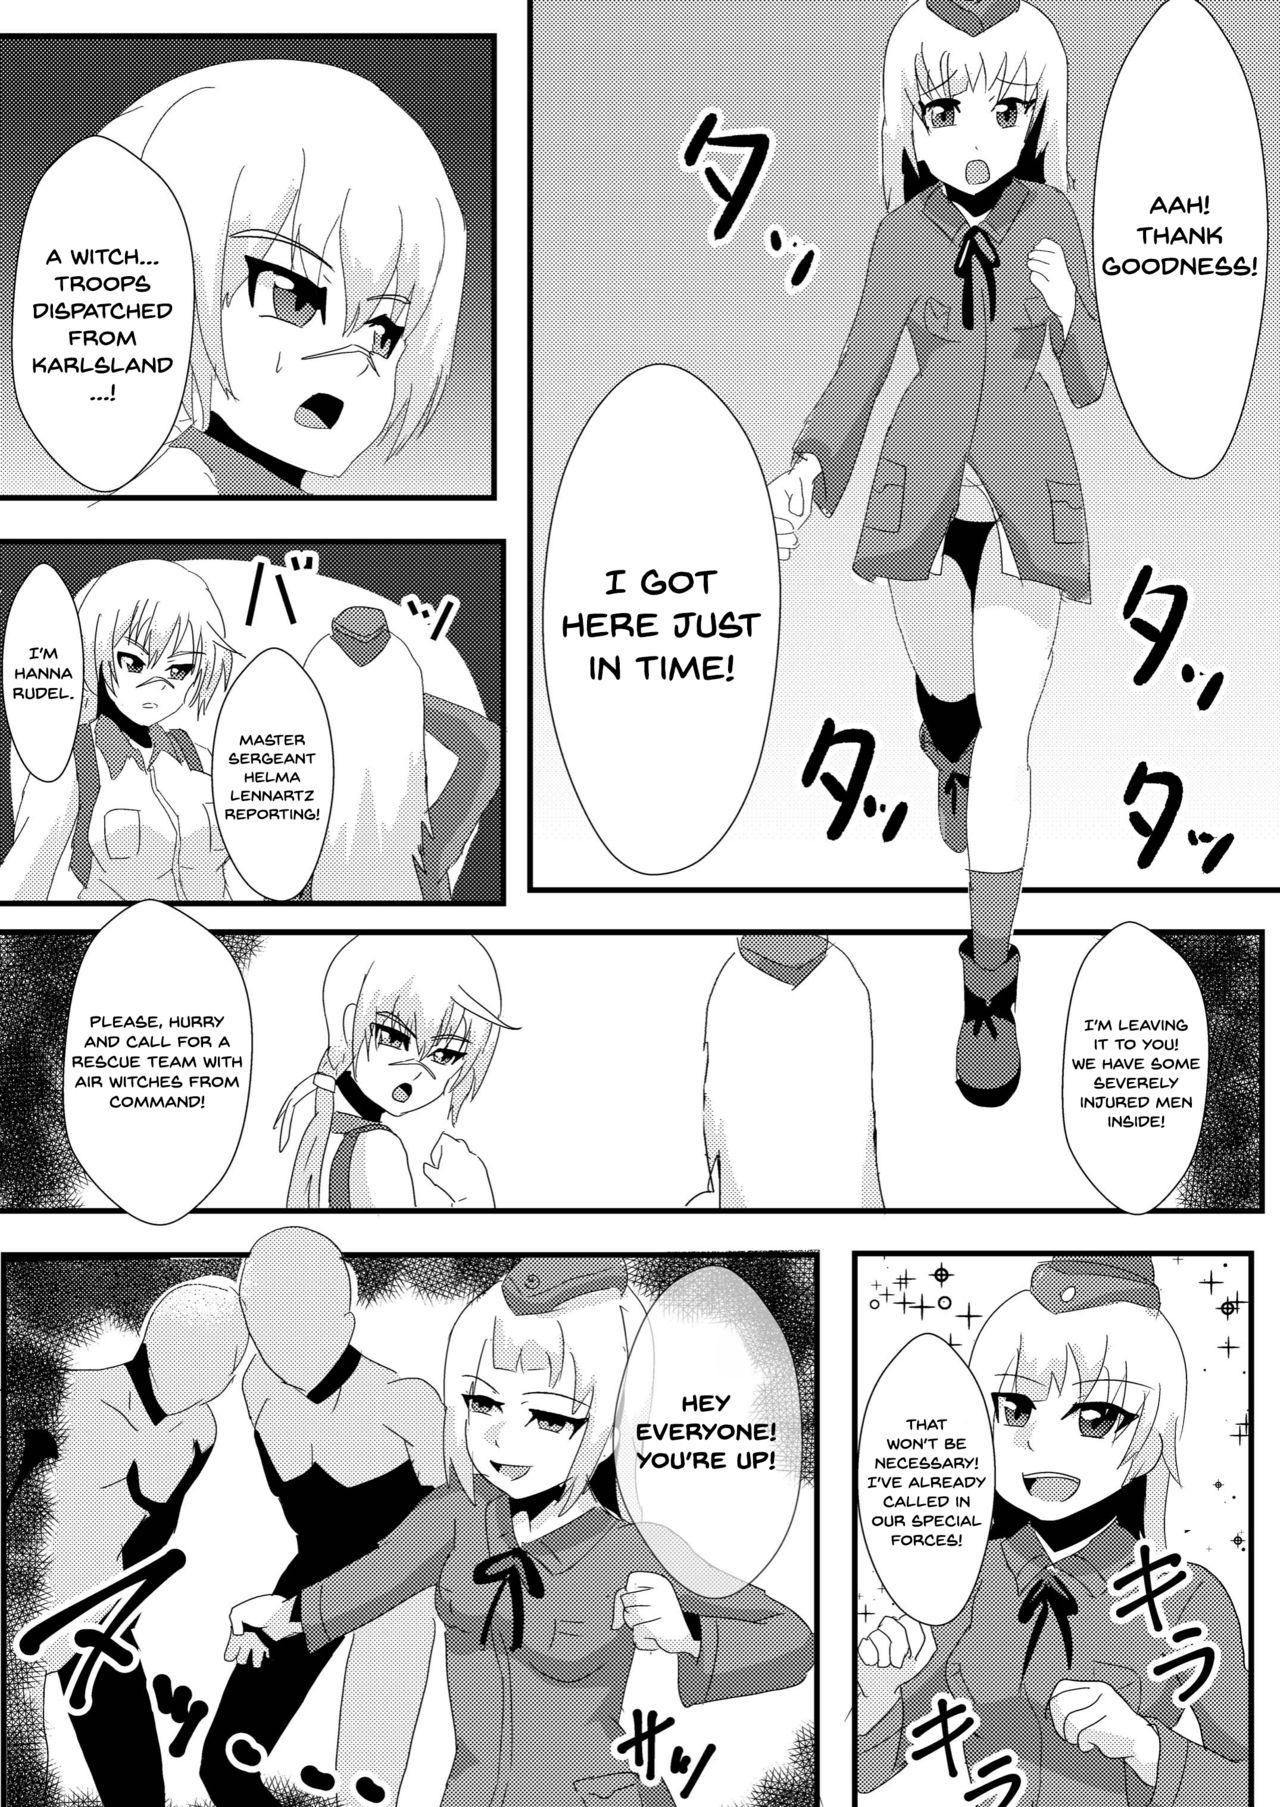 Blackmail Parasite Witches 2 - Strike witches Lovers - Page 7